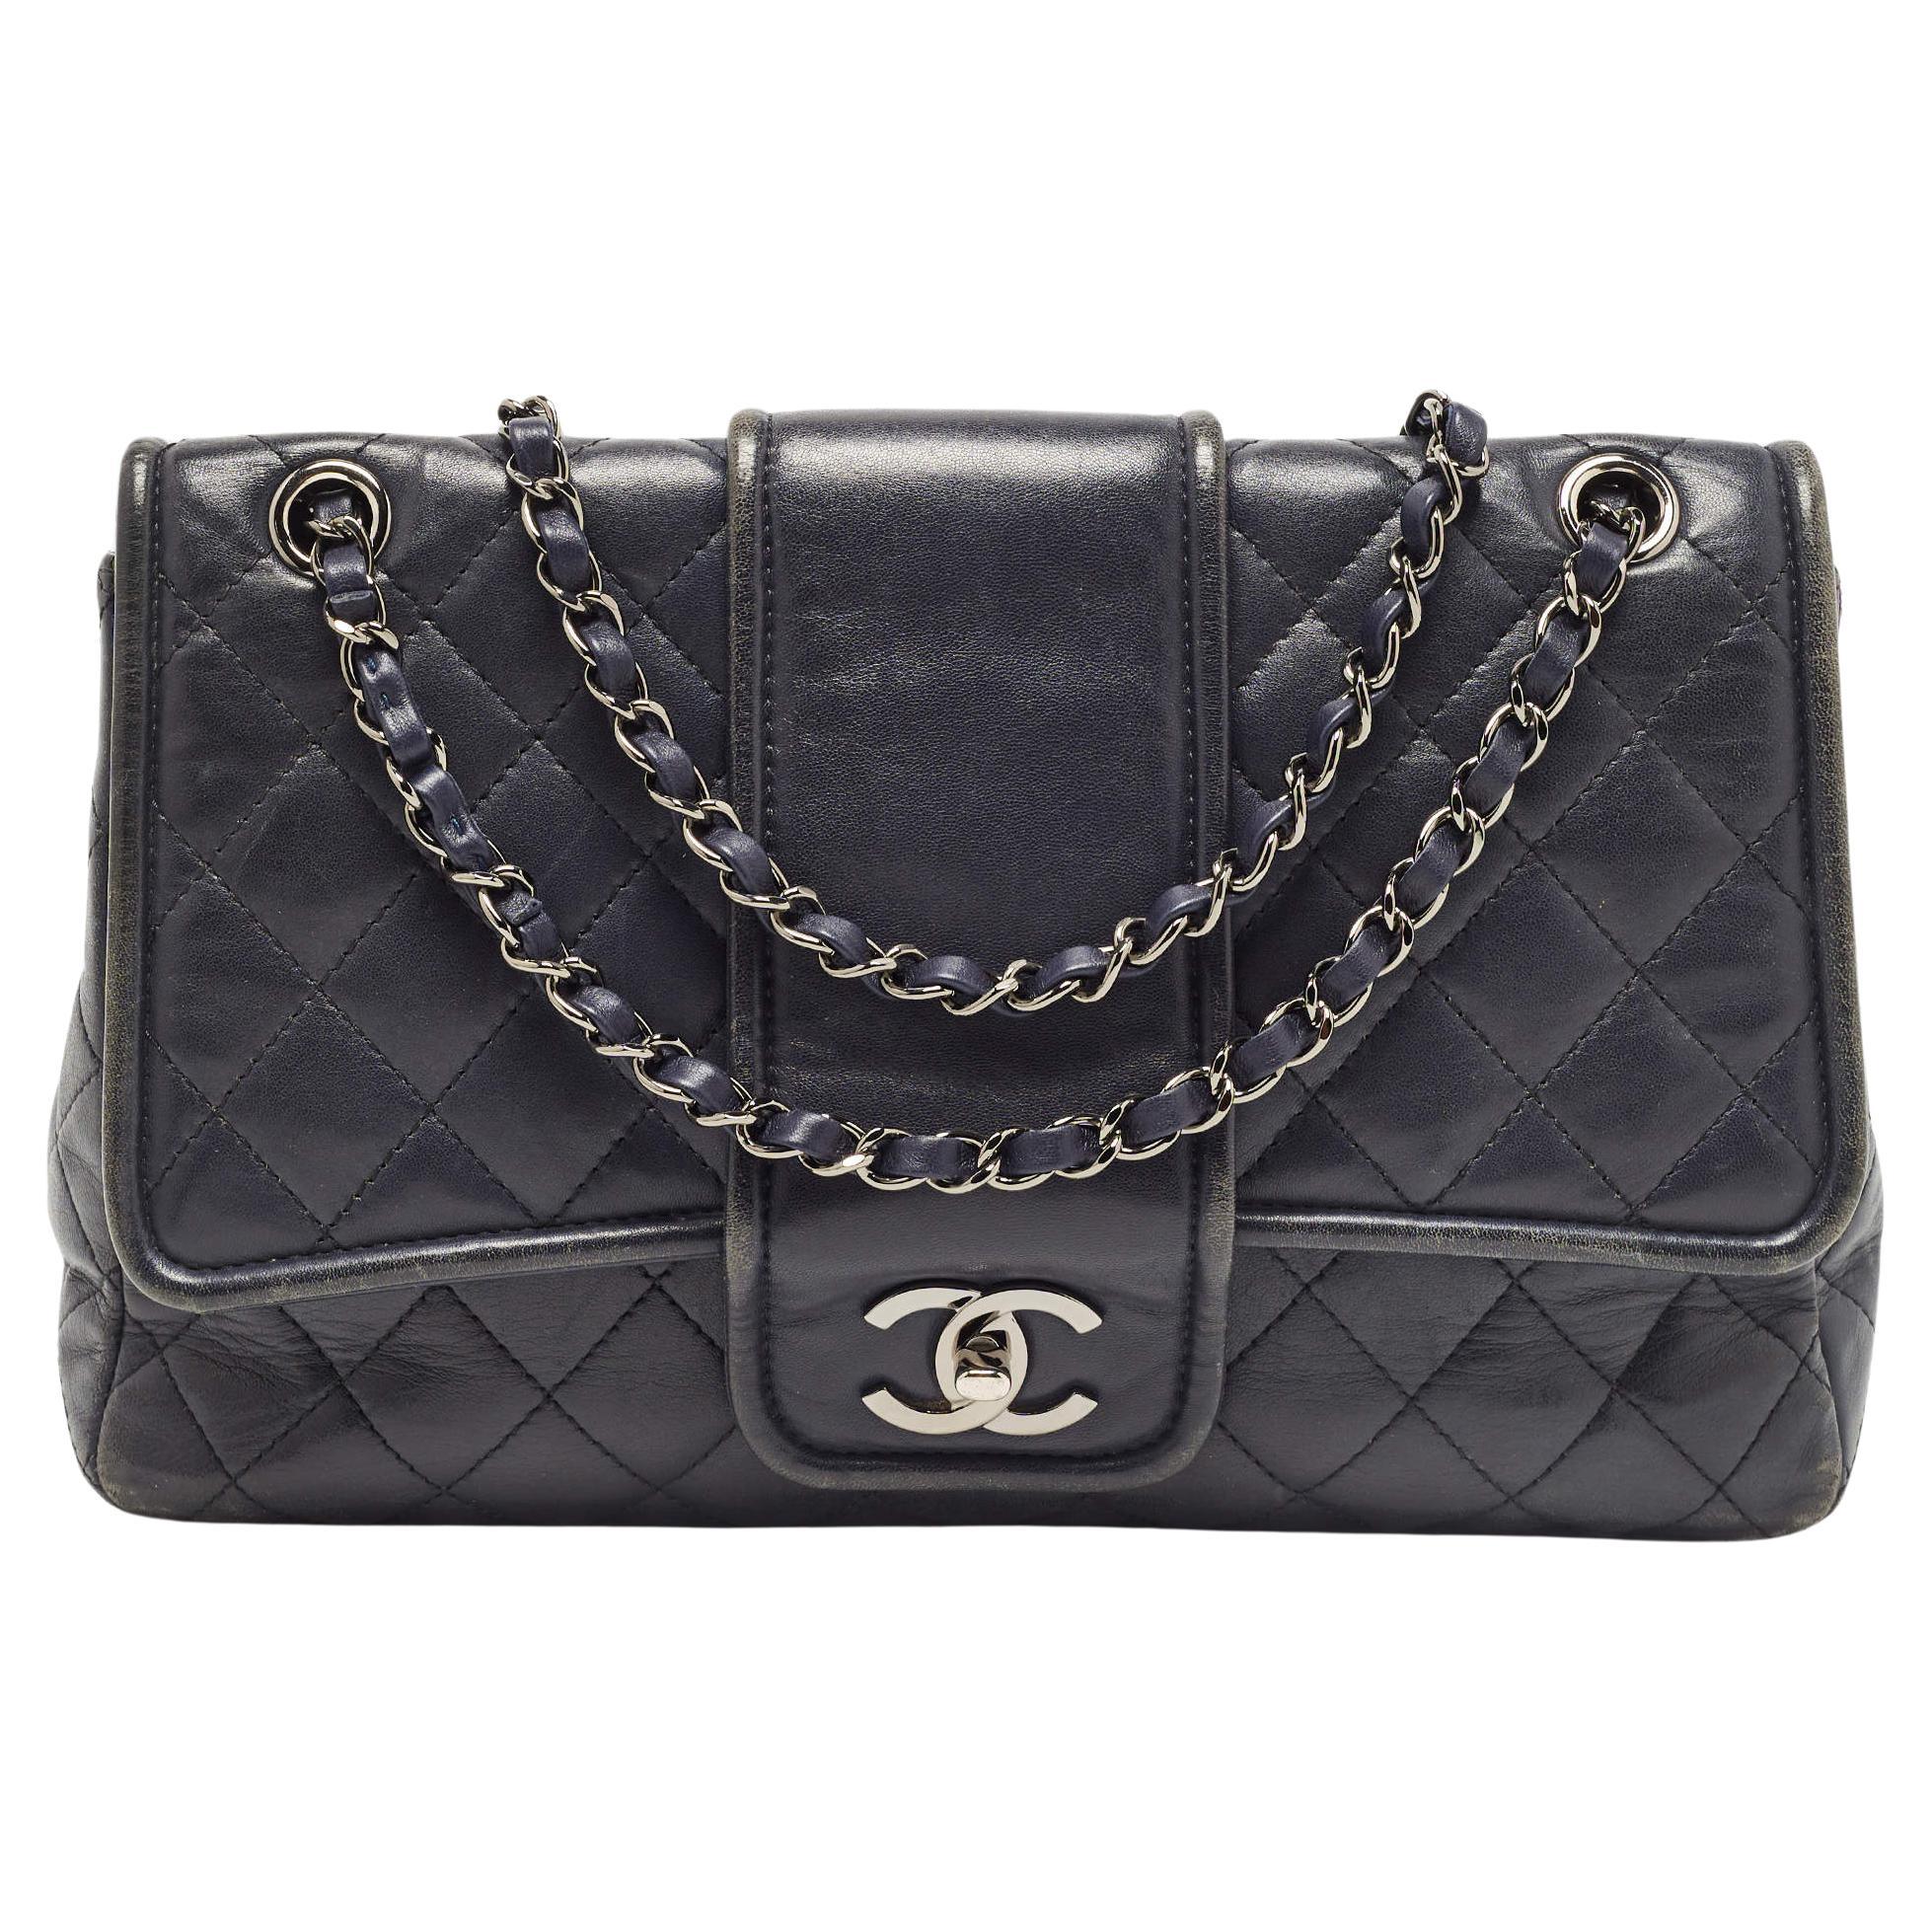 Chanel Navy Blue Quilted Leather Elementary Chic Flap Bag